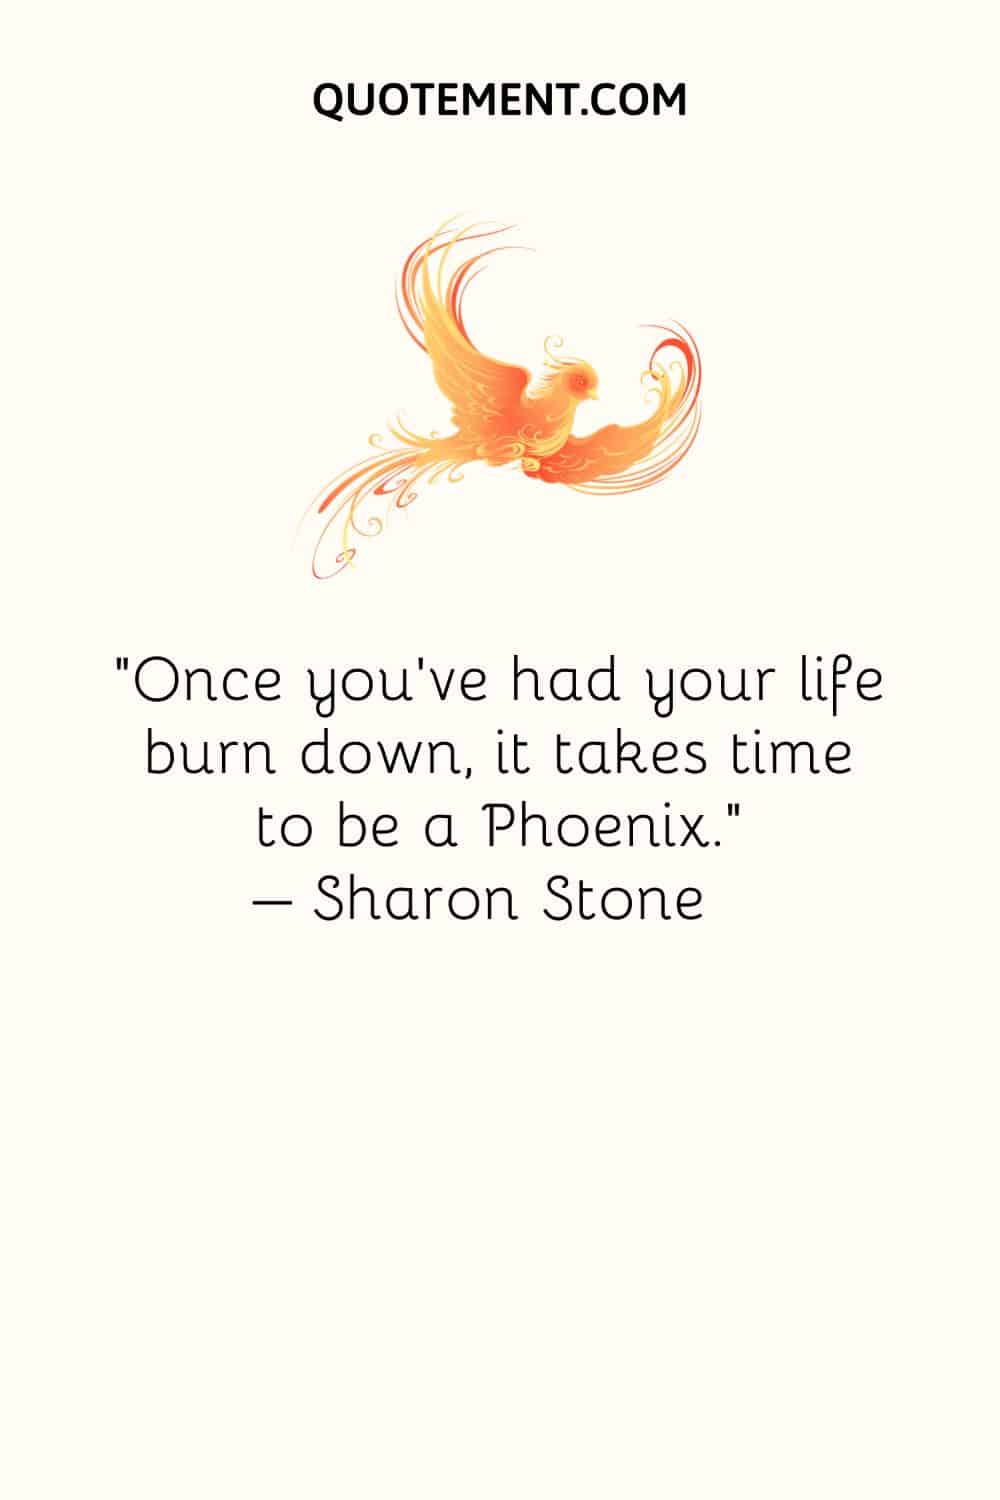 Once you’ve had your life burn down, it takes time to be a Phoenix